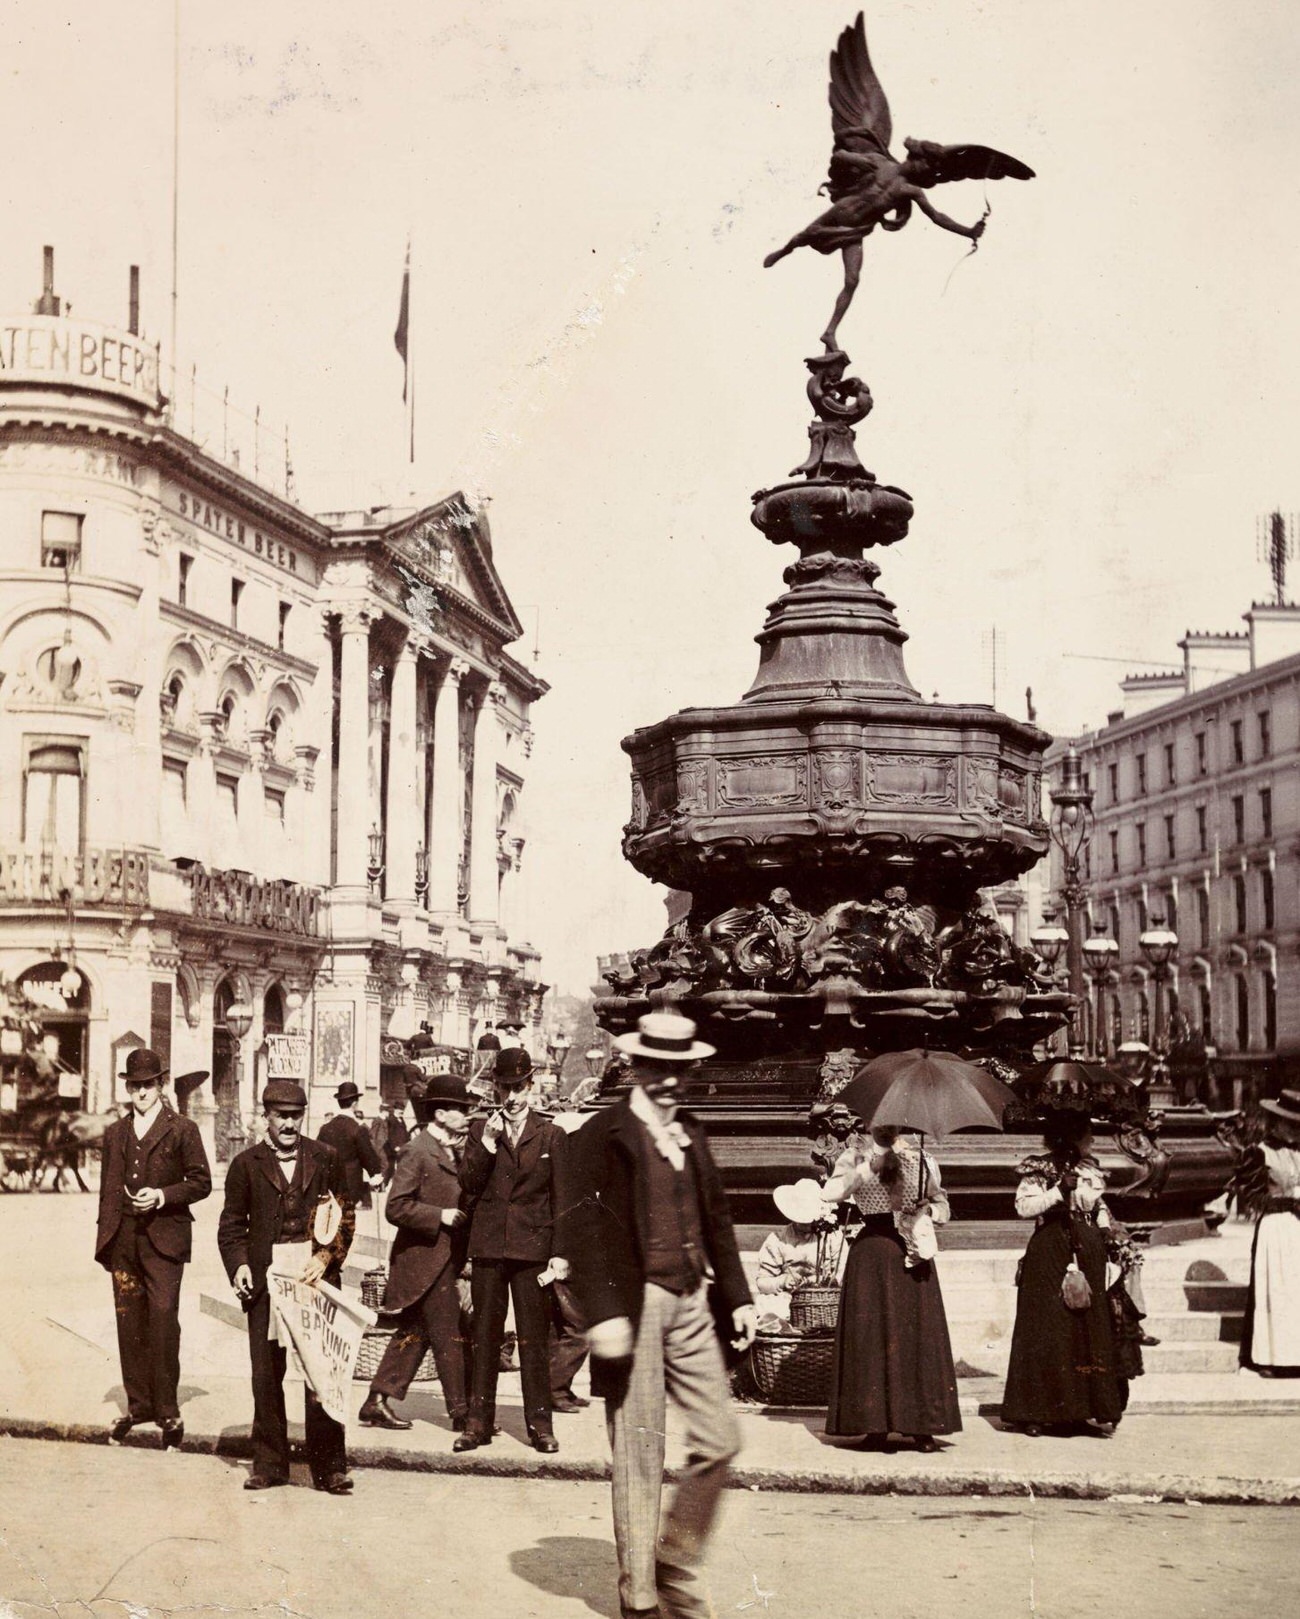 Piccadilly Circus, London, with the statue of Eros, circa 1900.